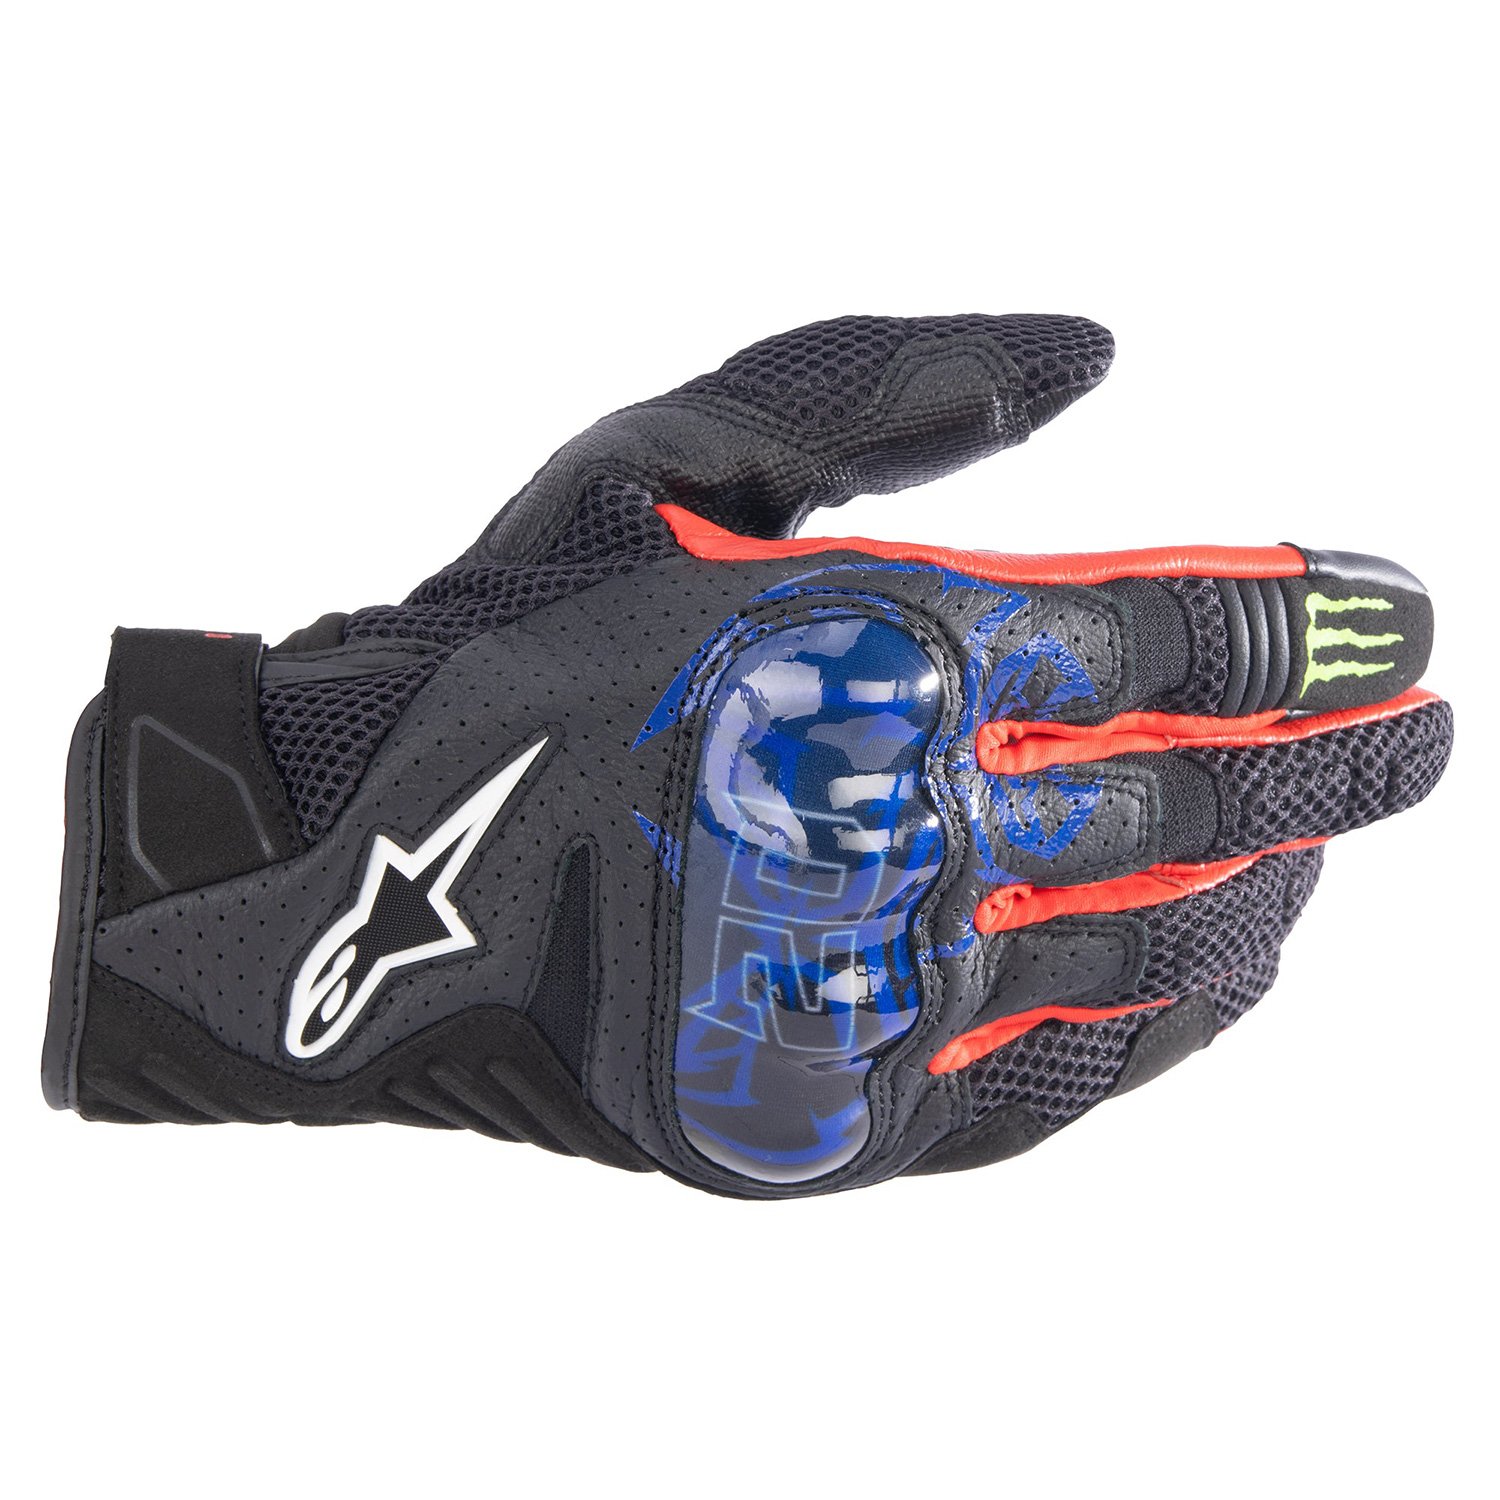 Image of Alpinestars FQ20 SMX-1 Air V2 Monster Black Blue Bright Red Green Size 2XL ID 8059347248202